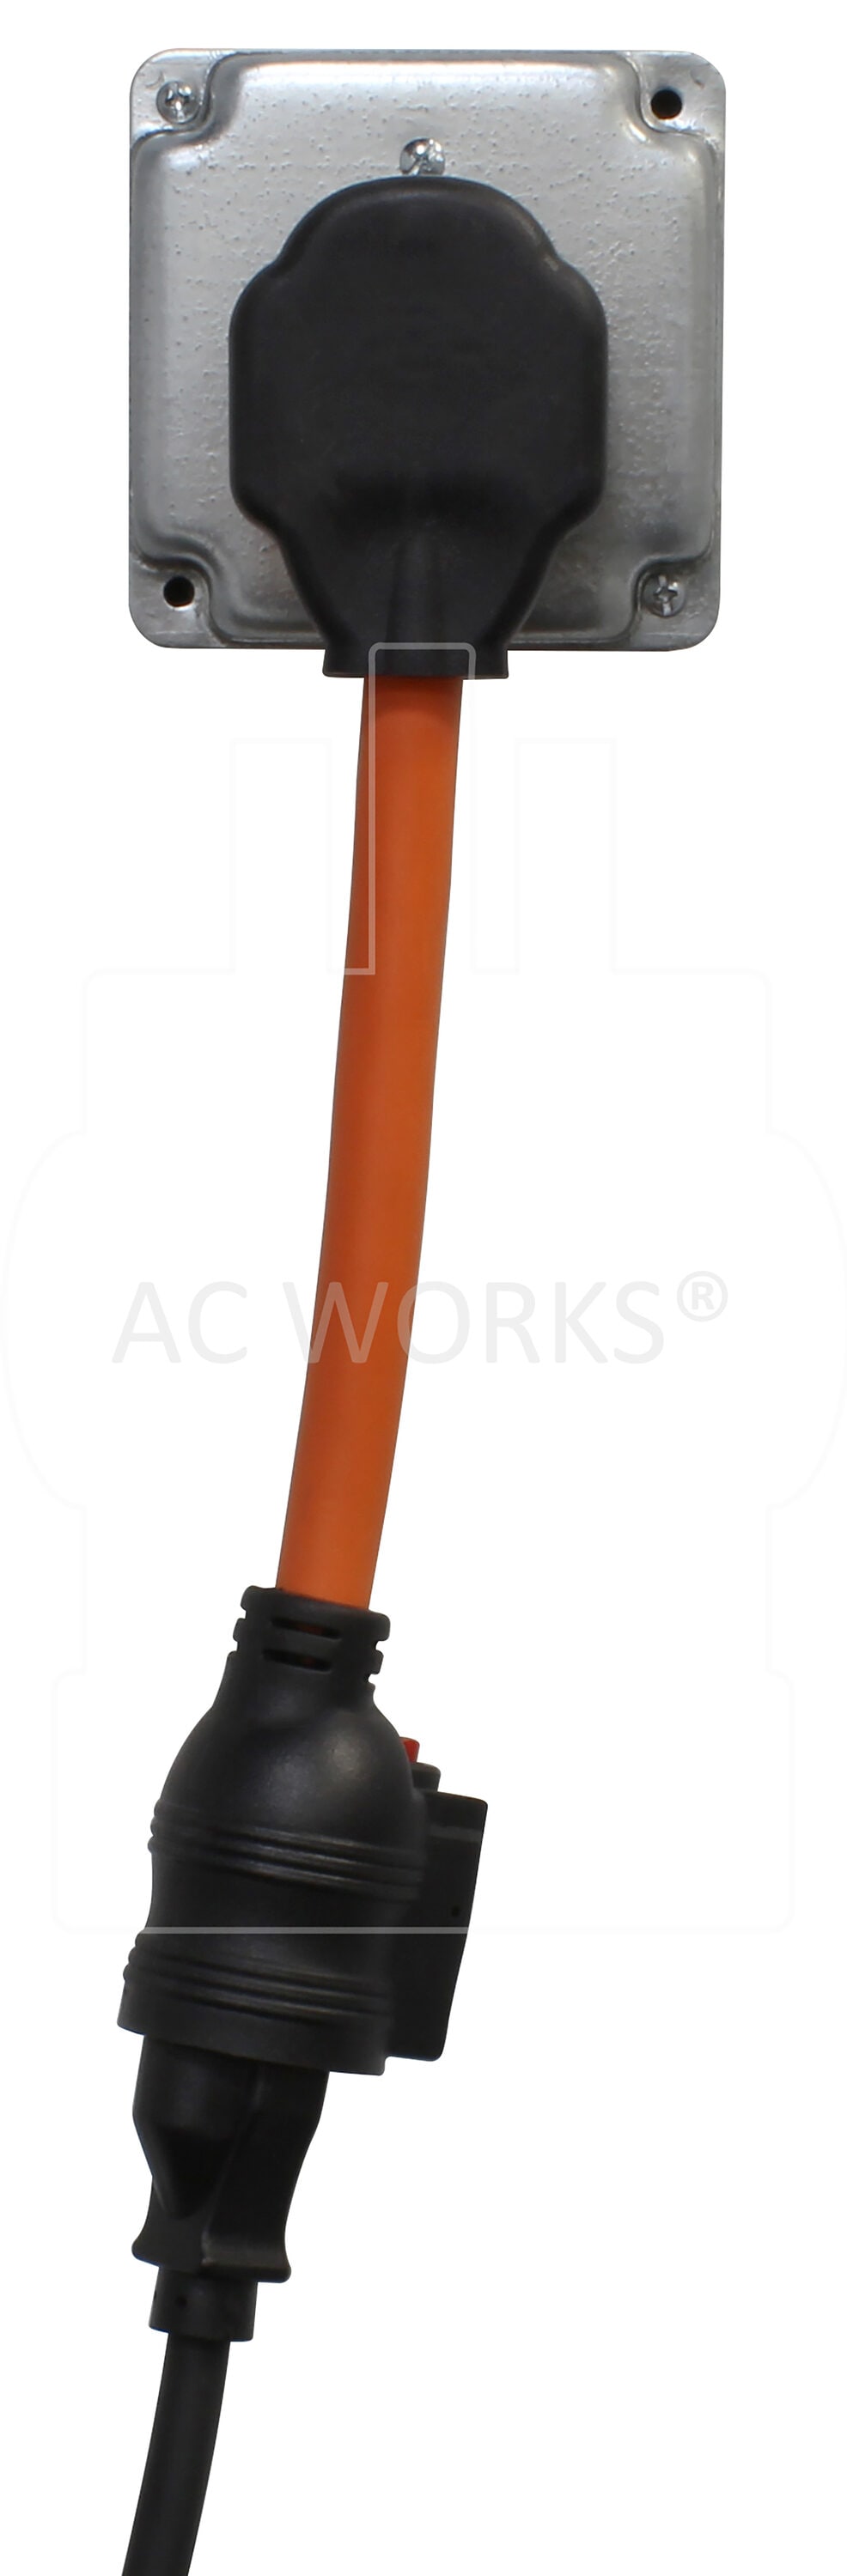 AC Works [S630CB620] 1.5ft 30A 3-Prong 6-30P Commercial HVAC Plug to 6-15/20 Outlet with 20A Breaker